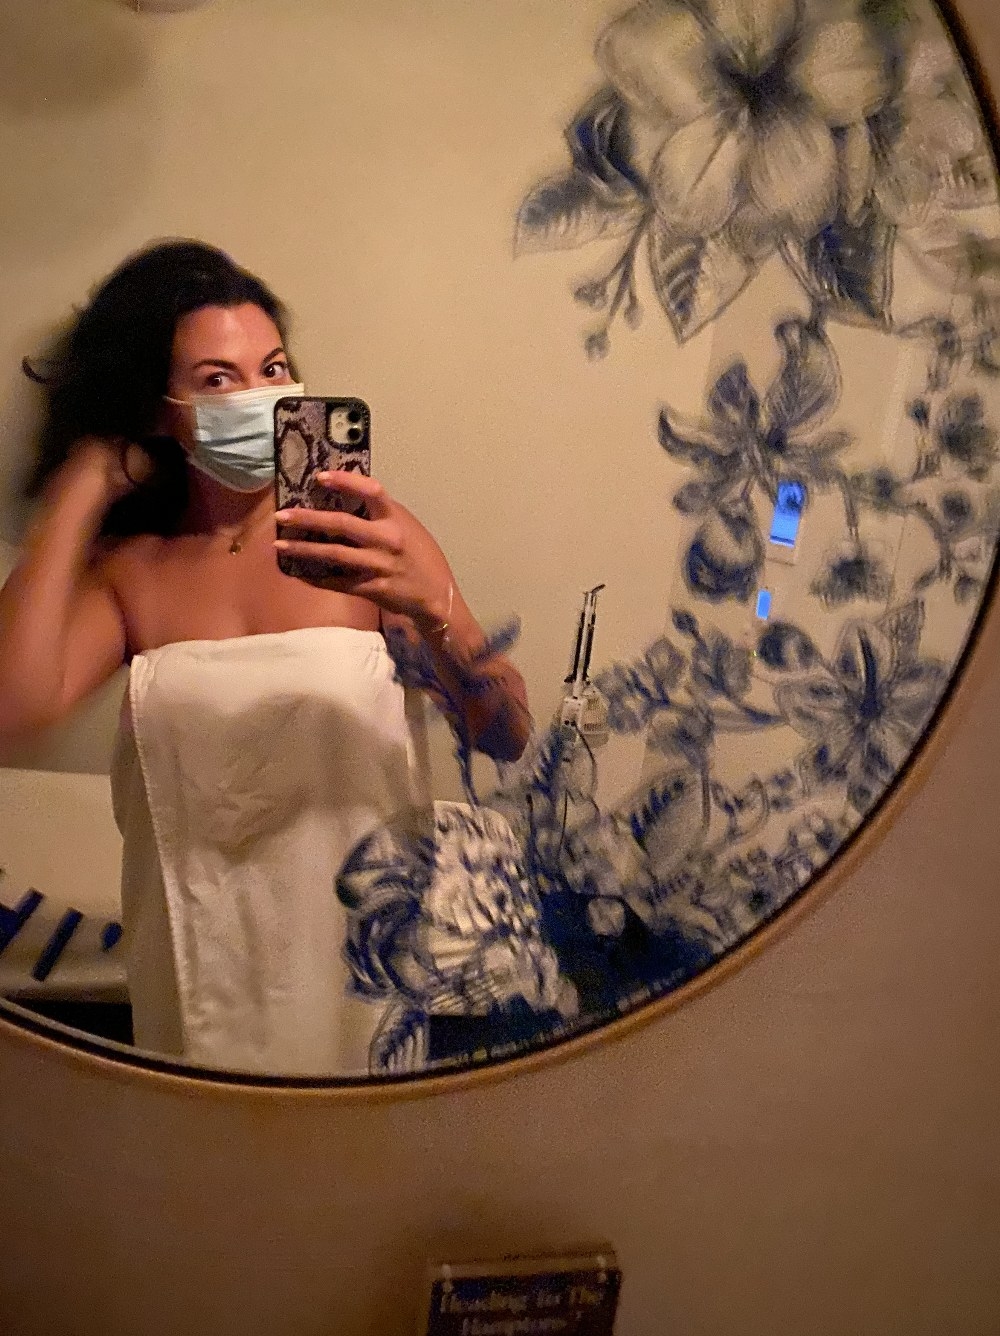 An image of the author in a towel taking a selfie in the mirror